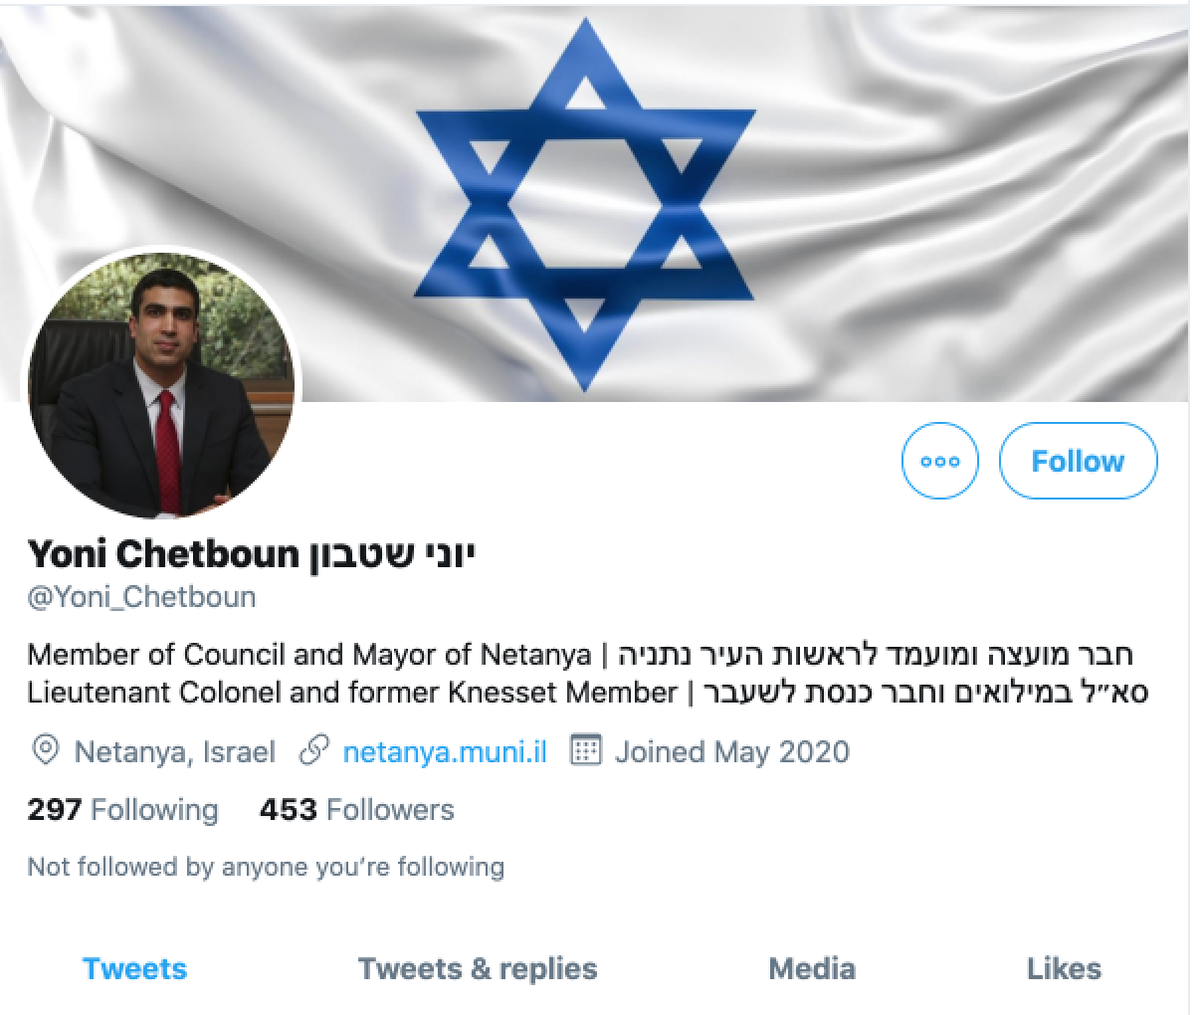 The accounts involved impersonated Yoni Chetboun, an Israeli special operations Lt Col who went on to serve in the Knesset, and a nonexistent reporter for France24. They've since been suspended from Twitter.